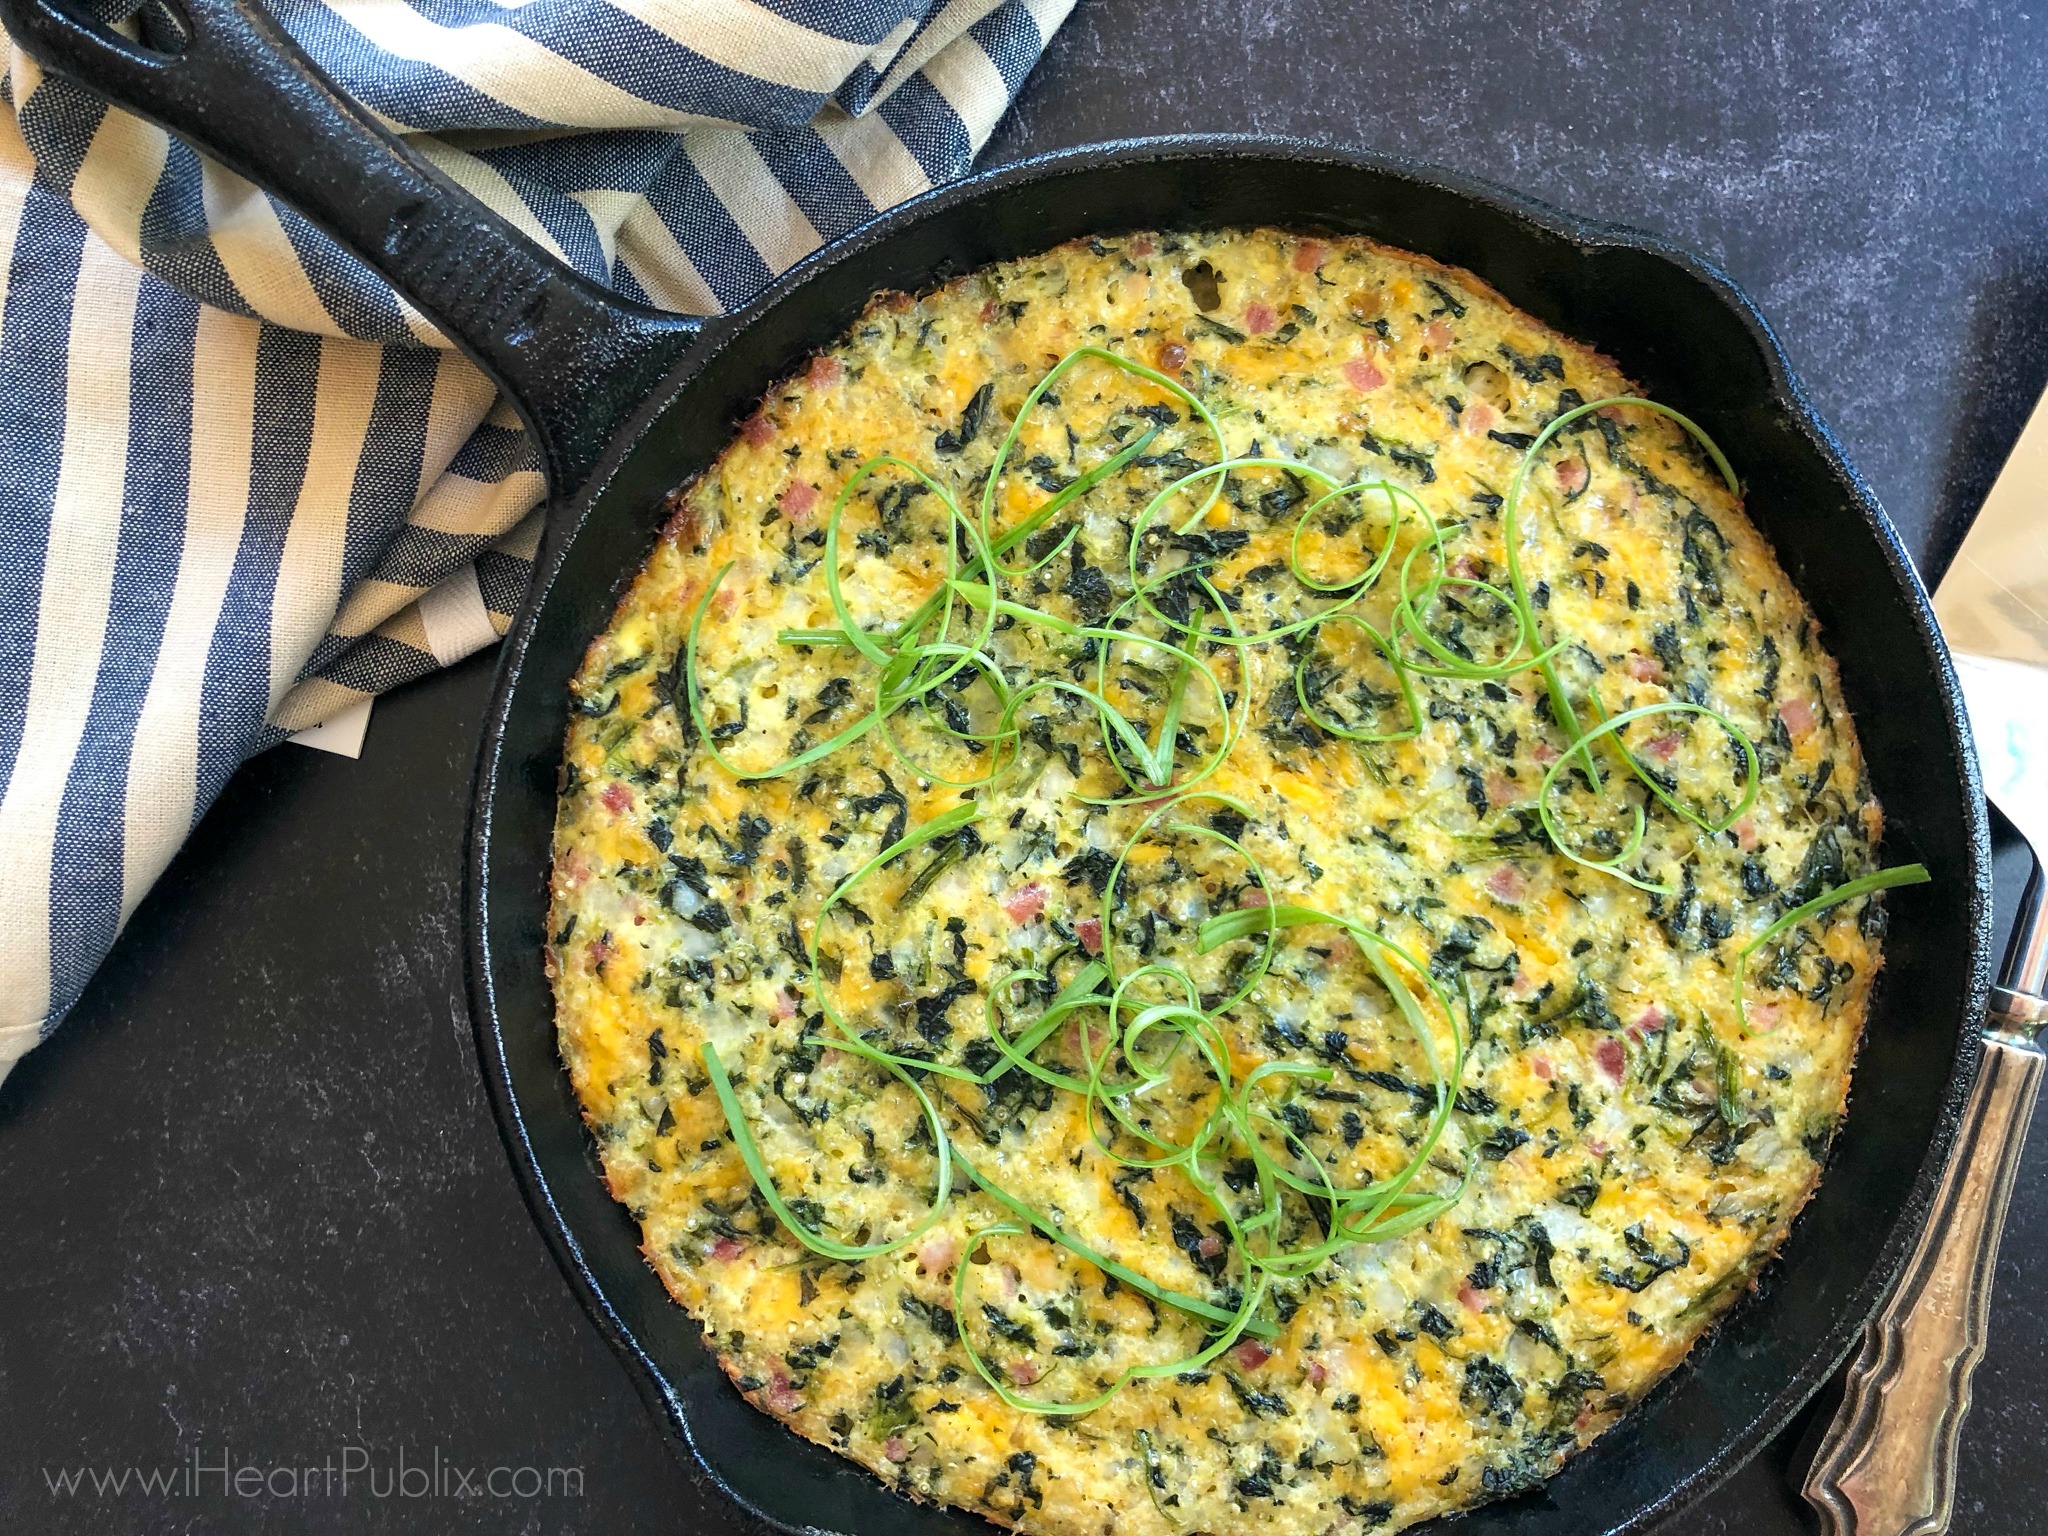 Quinoa Frittata - Fantastic Recipe To Go With The Super Deal On RiceSelect Quinoa At Publix on I Heart Publix 2